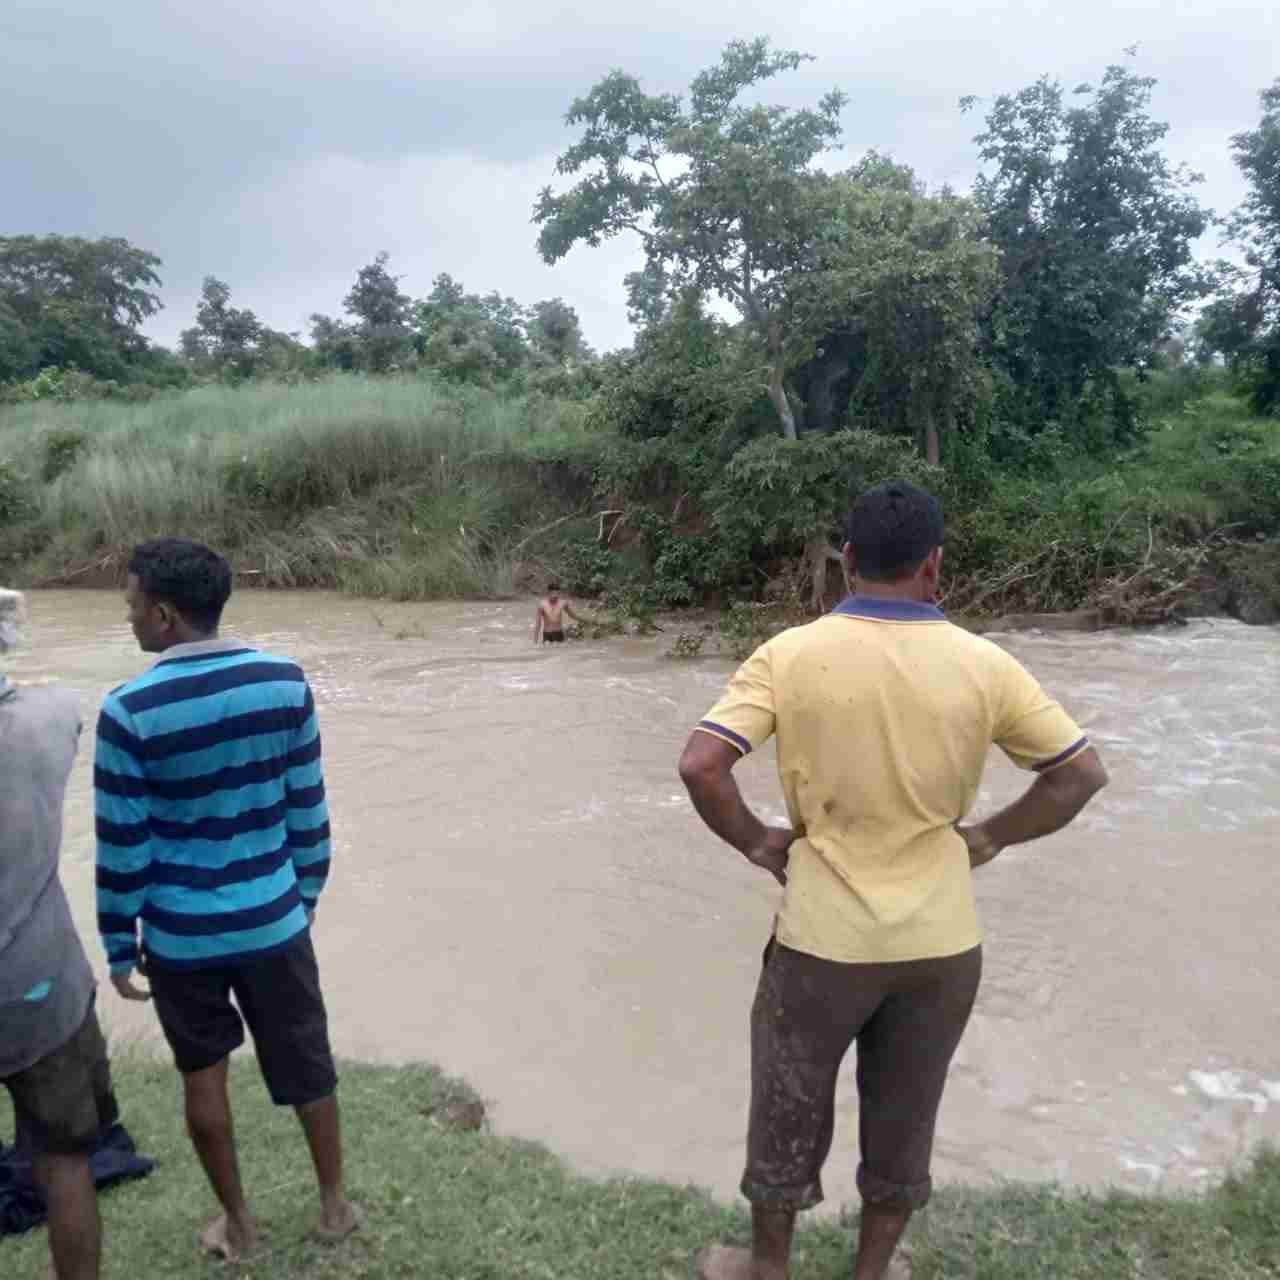 Two school children died after drowning in the river